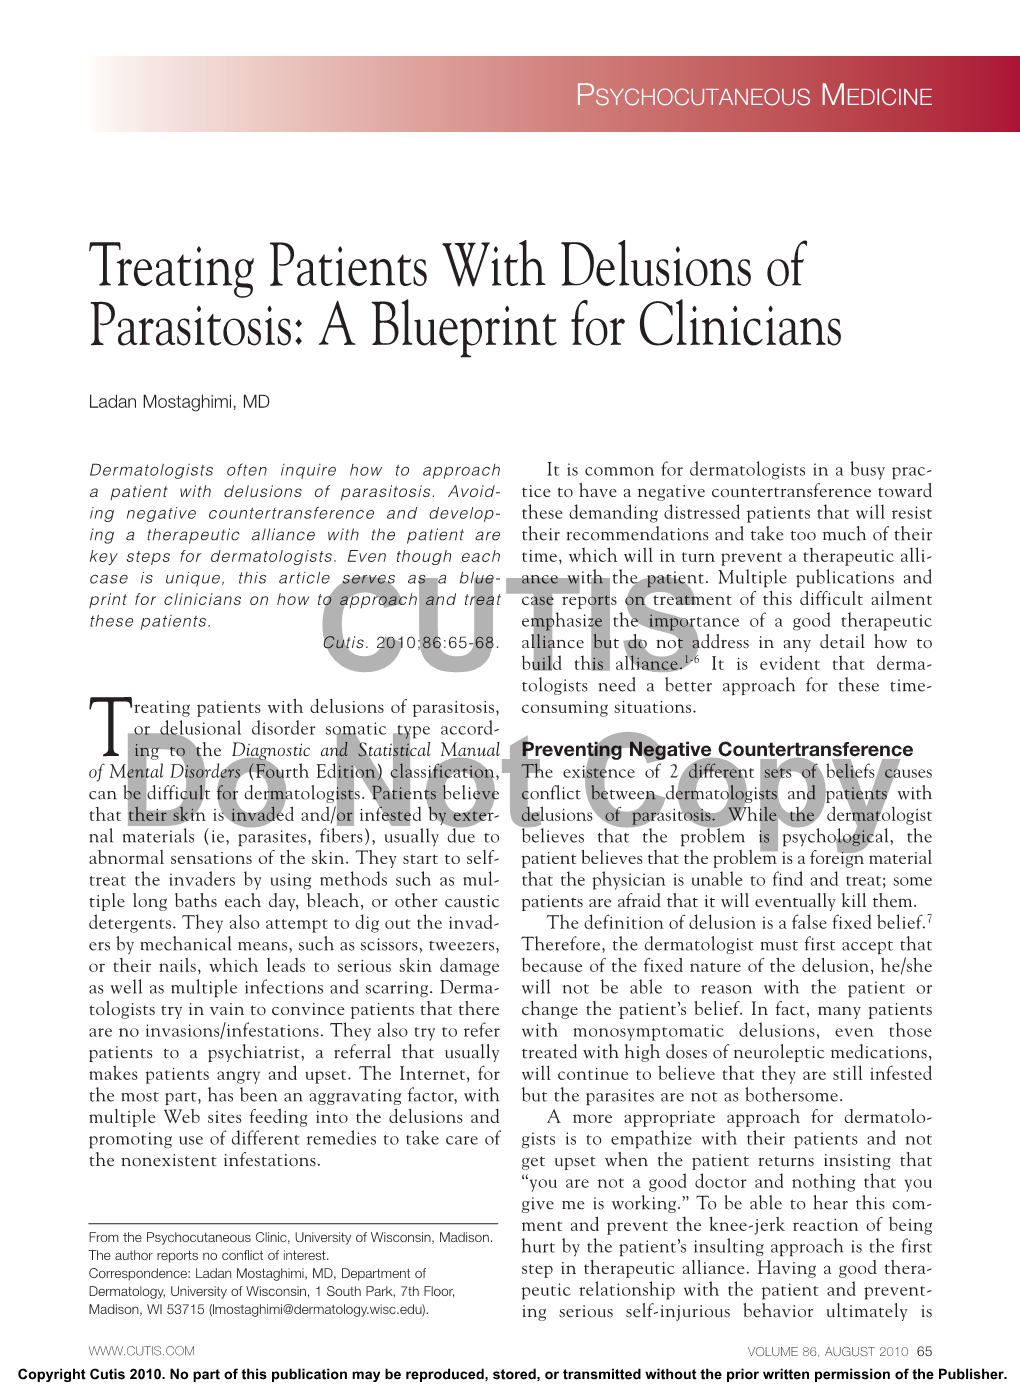 Treating Patients with Delusions of Parasitosis: a Blueprint for Clinicians